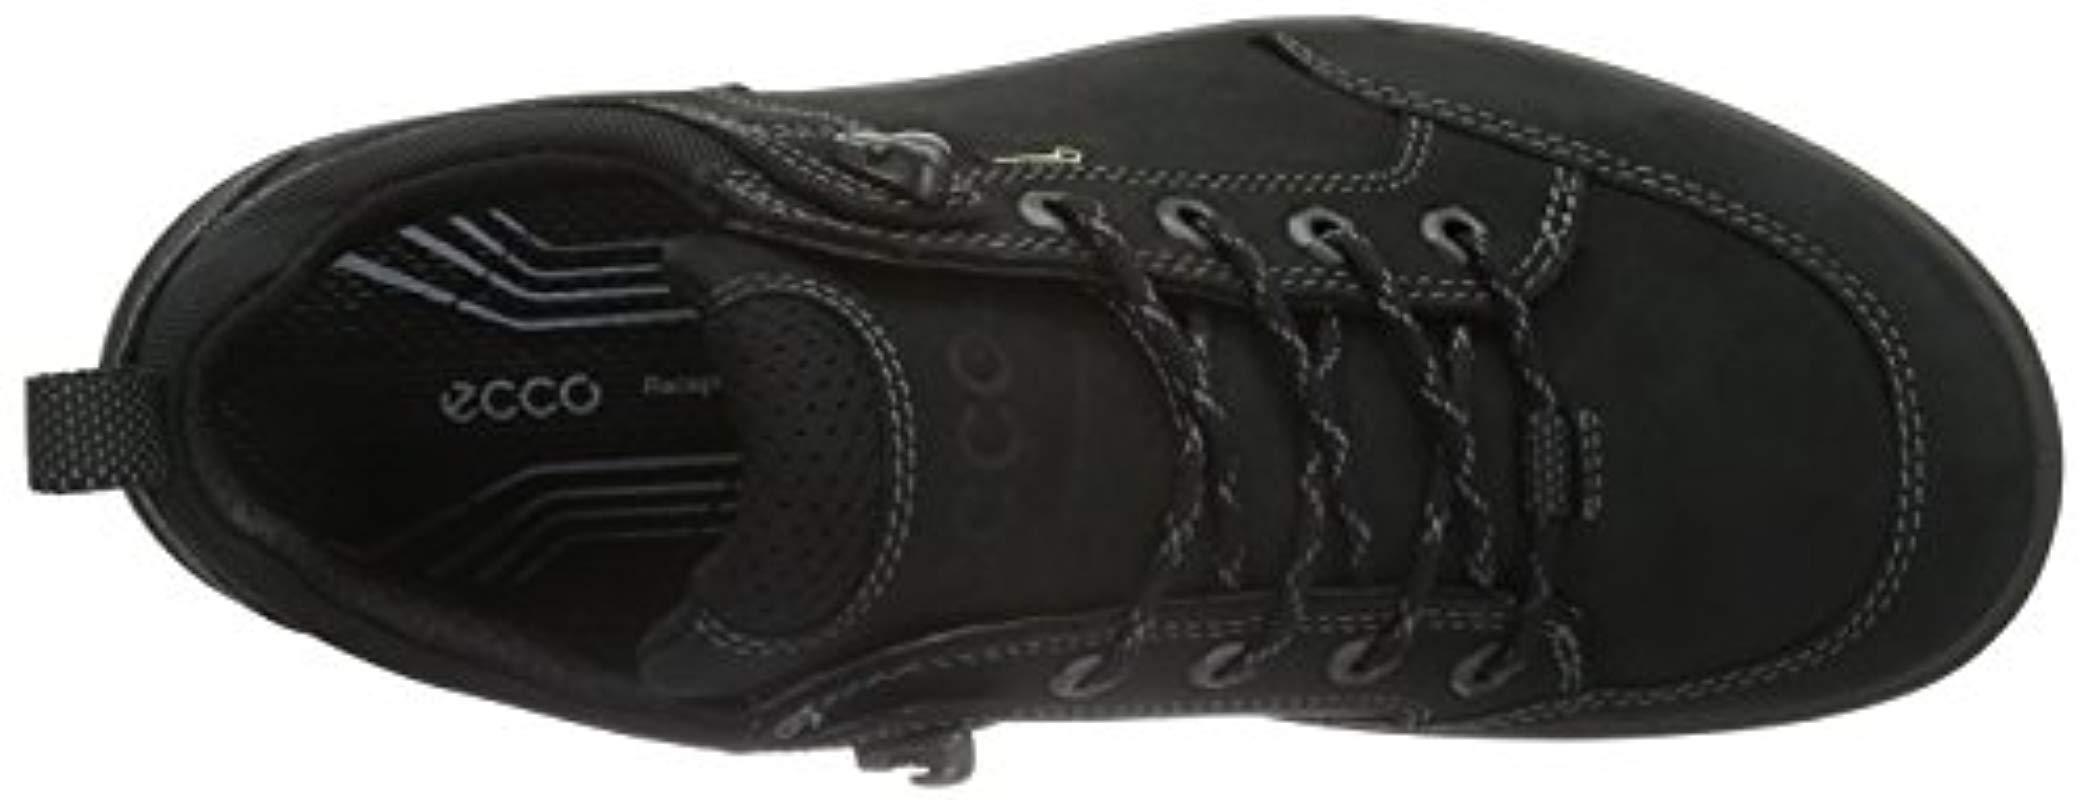 Xpedition Iii Hiking Shoe in Black for |